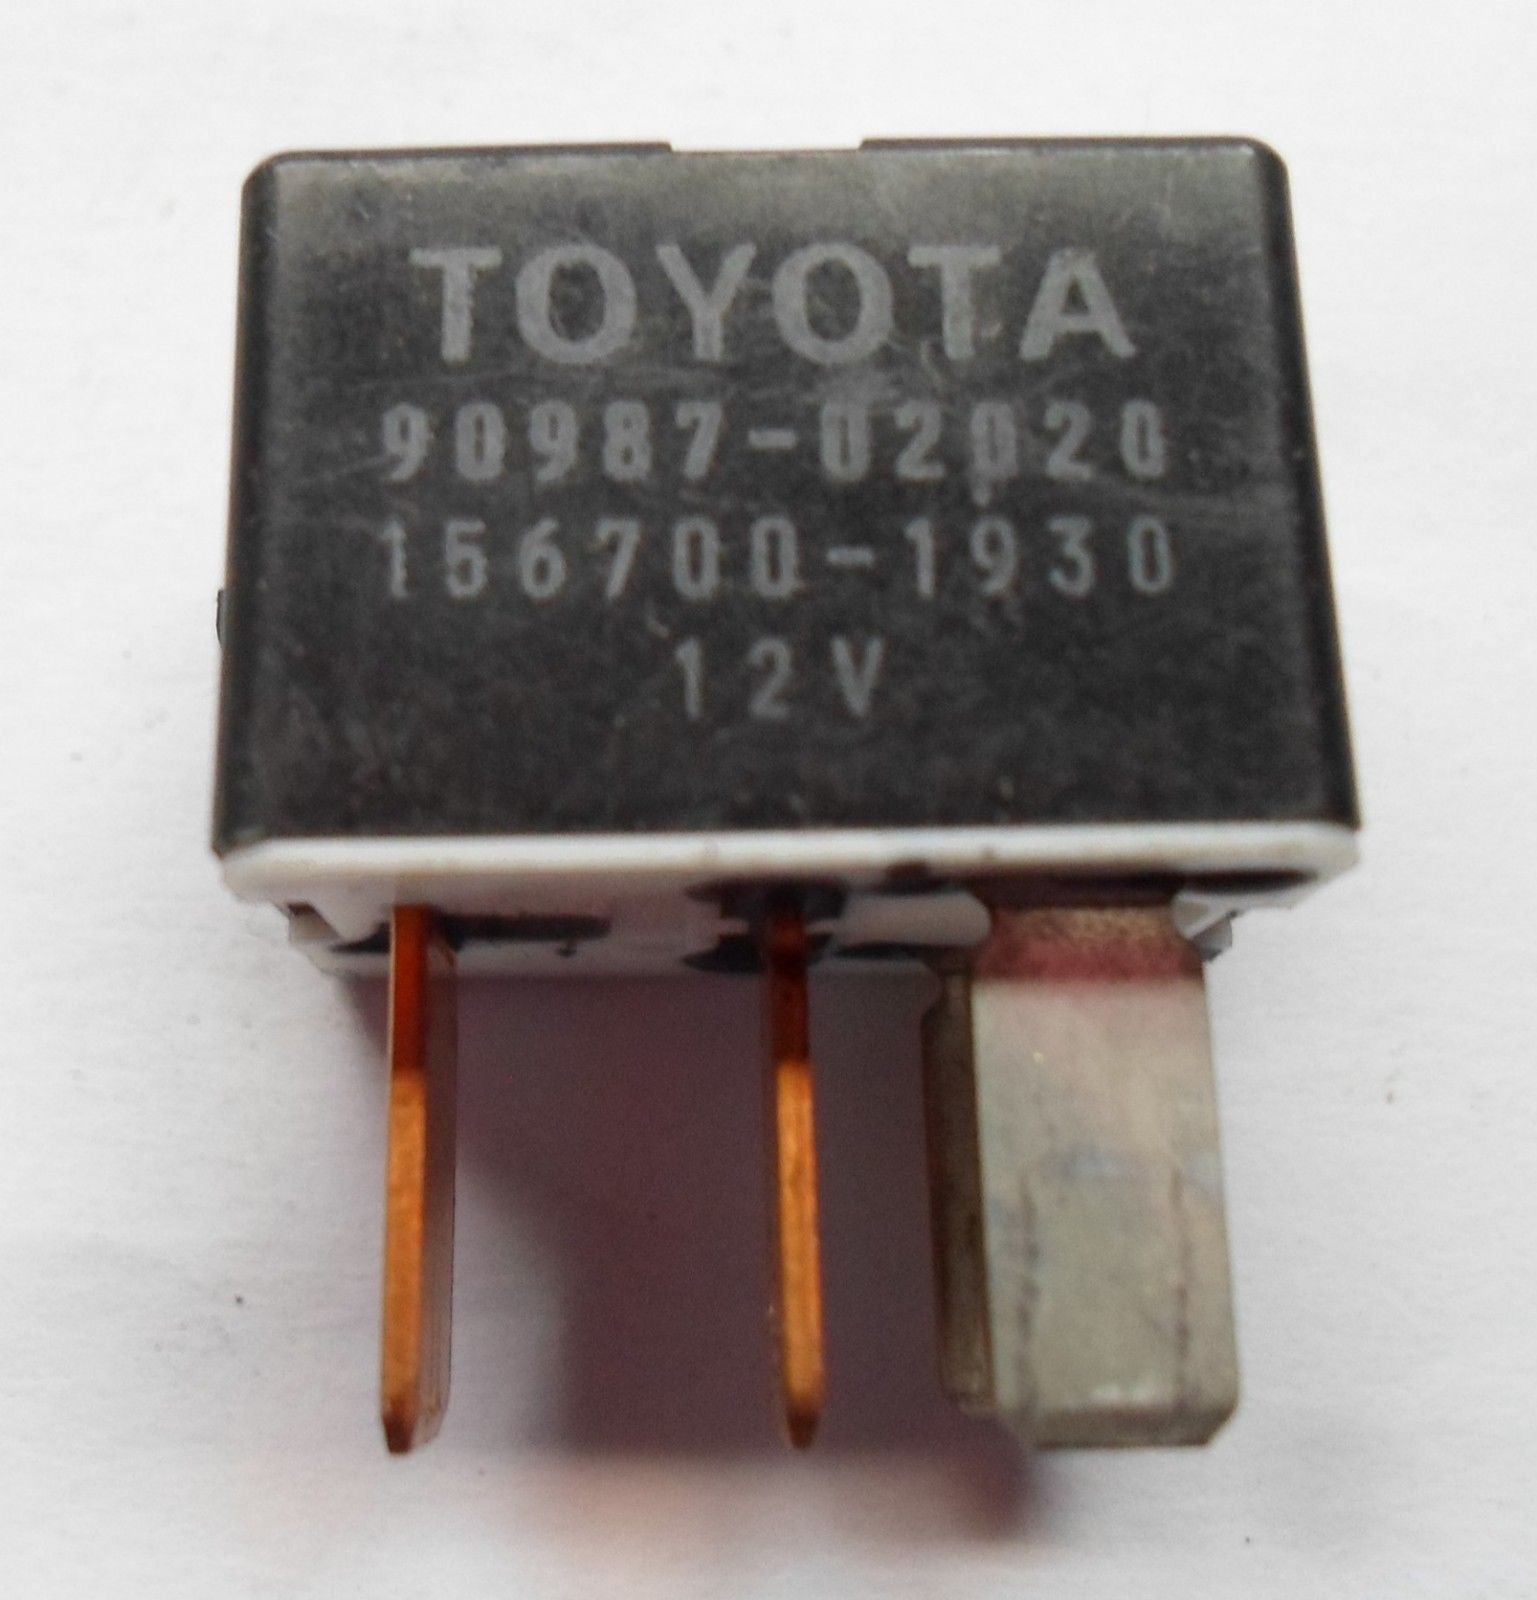 TOYOTA  RELAY 90987-02020 DENSO  TESTED 6 MONTH WARRANTY  FREE SHIPPING! T4